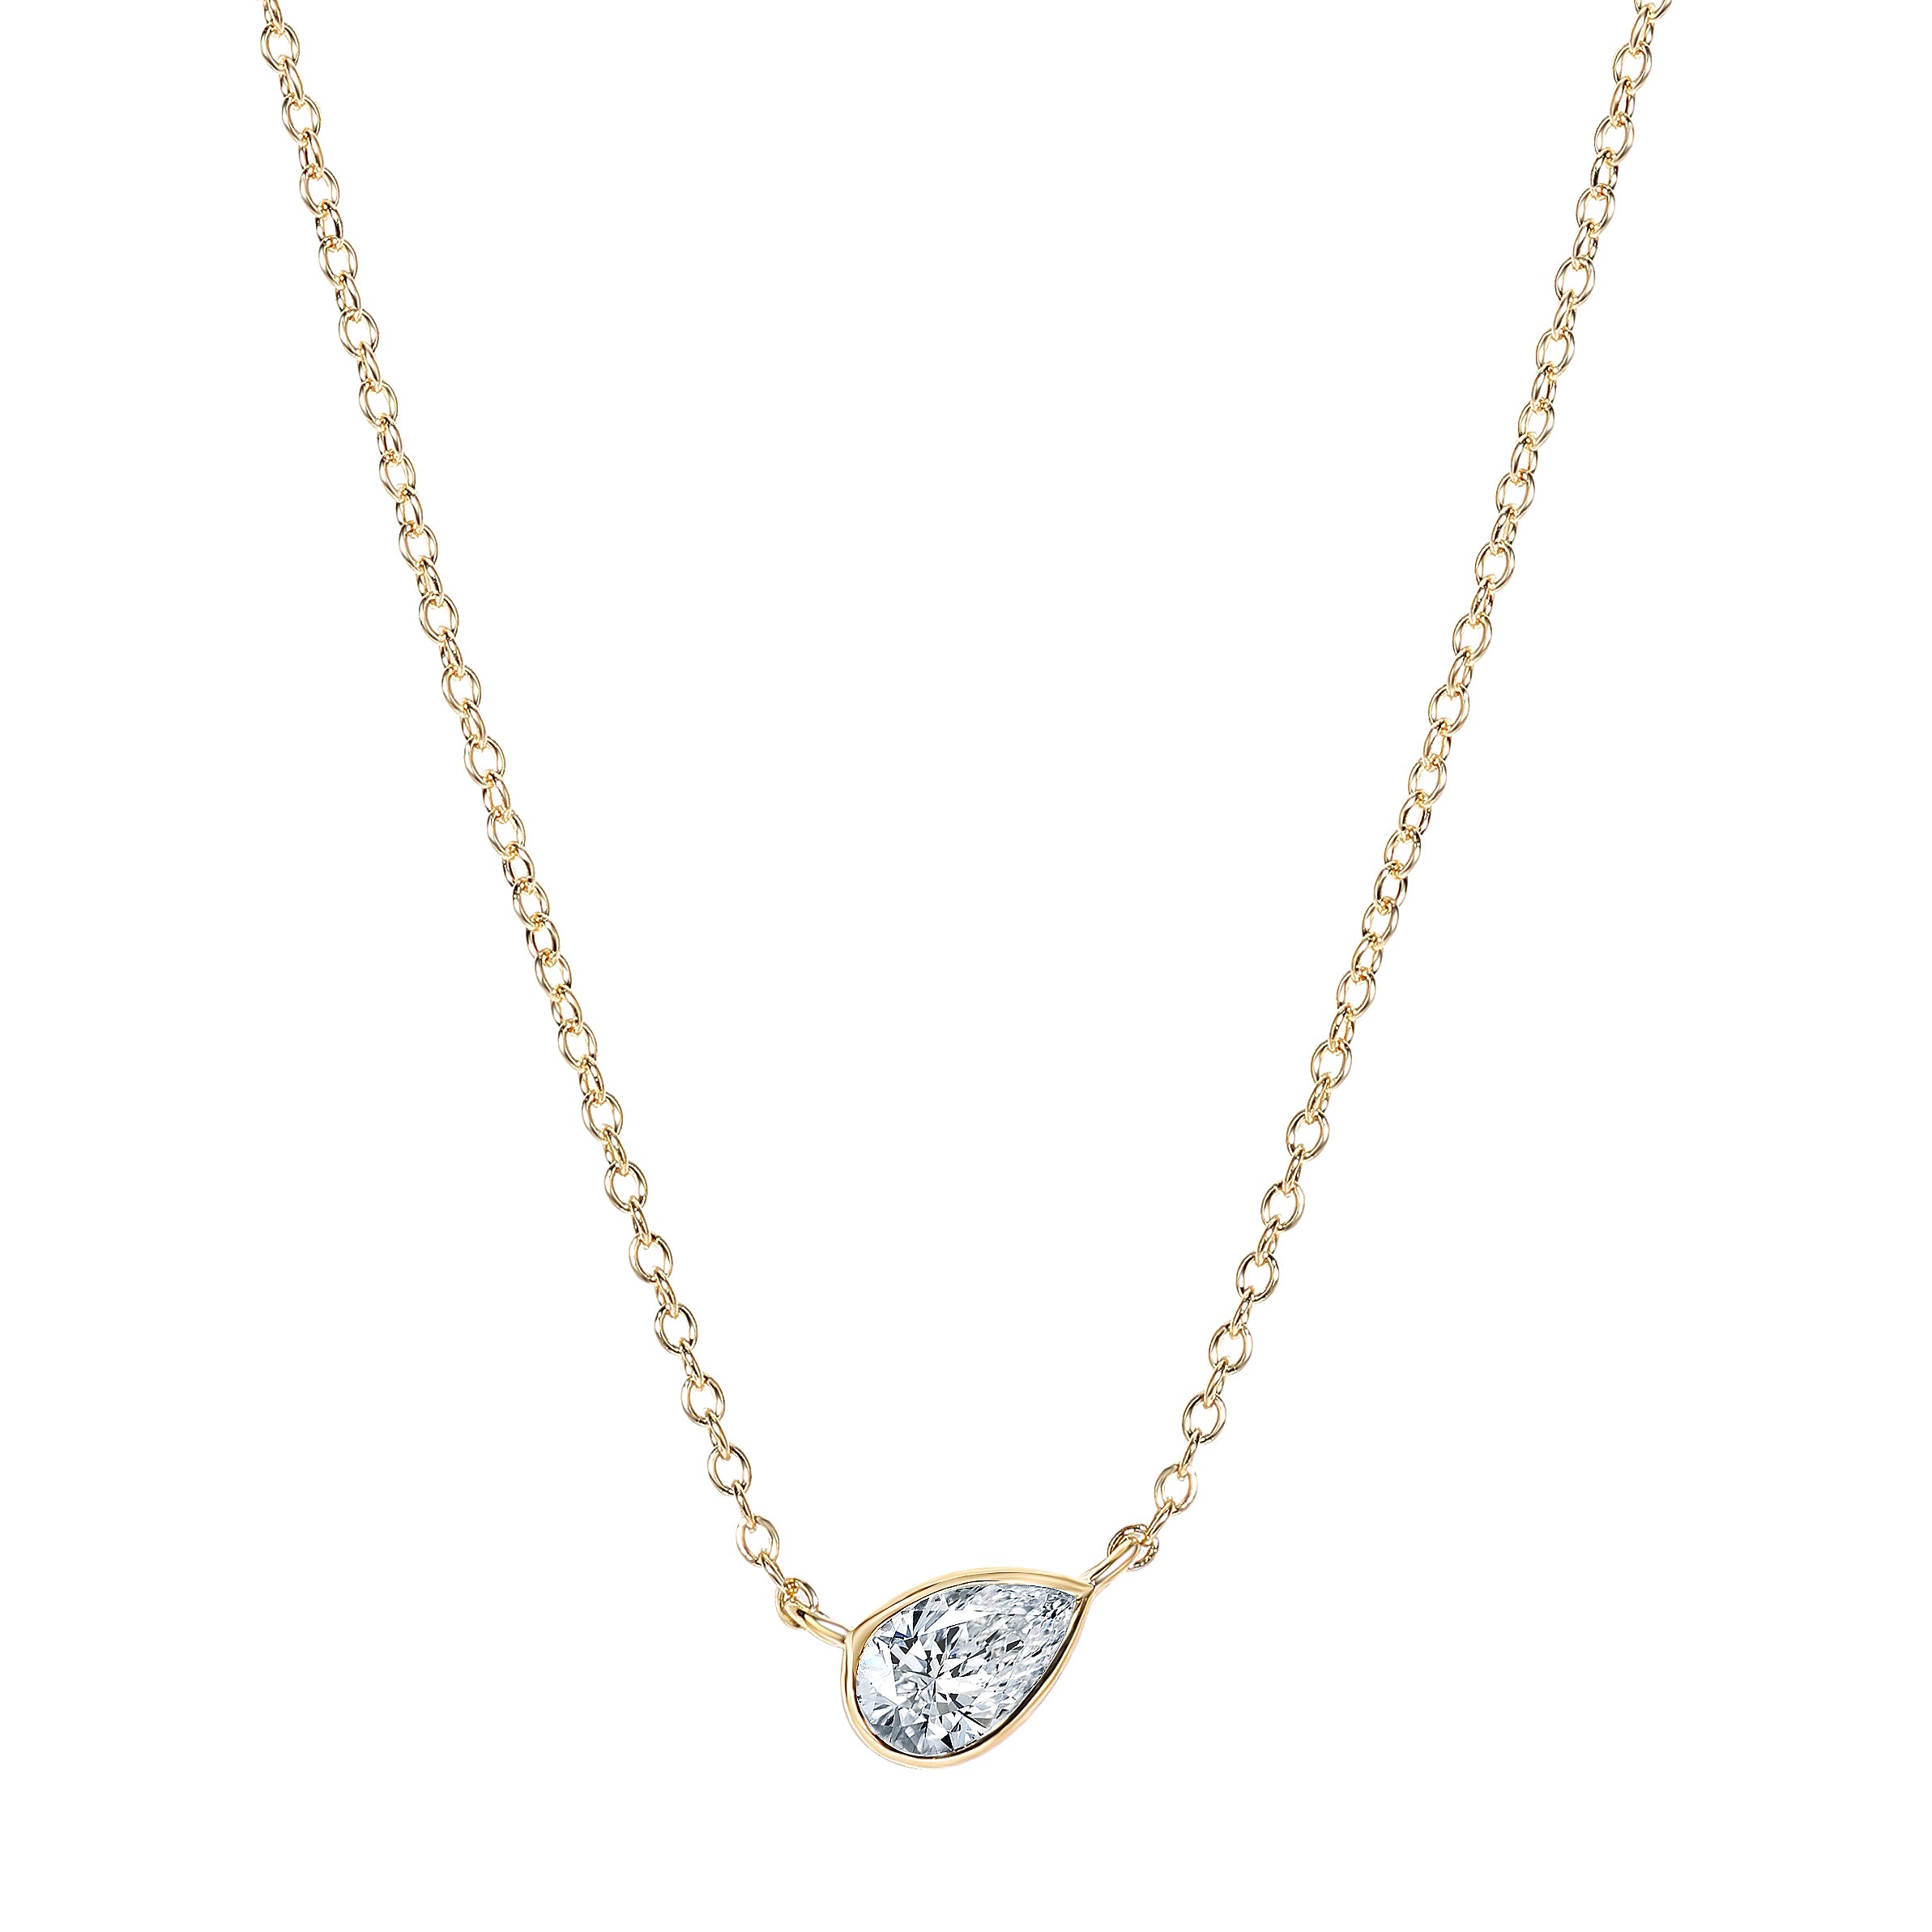 14K Gold Cable Cut Chain Necklace with 0.30 CT Diamonds